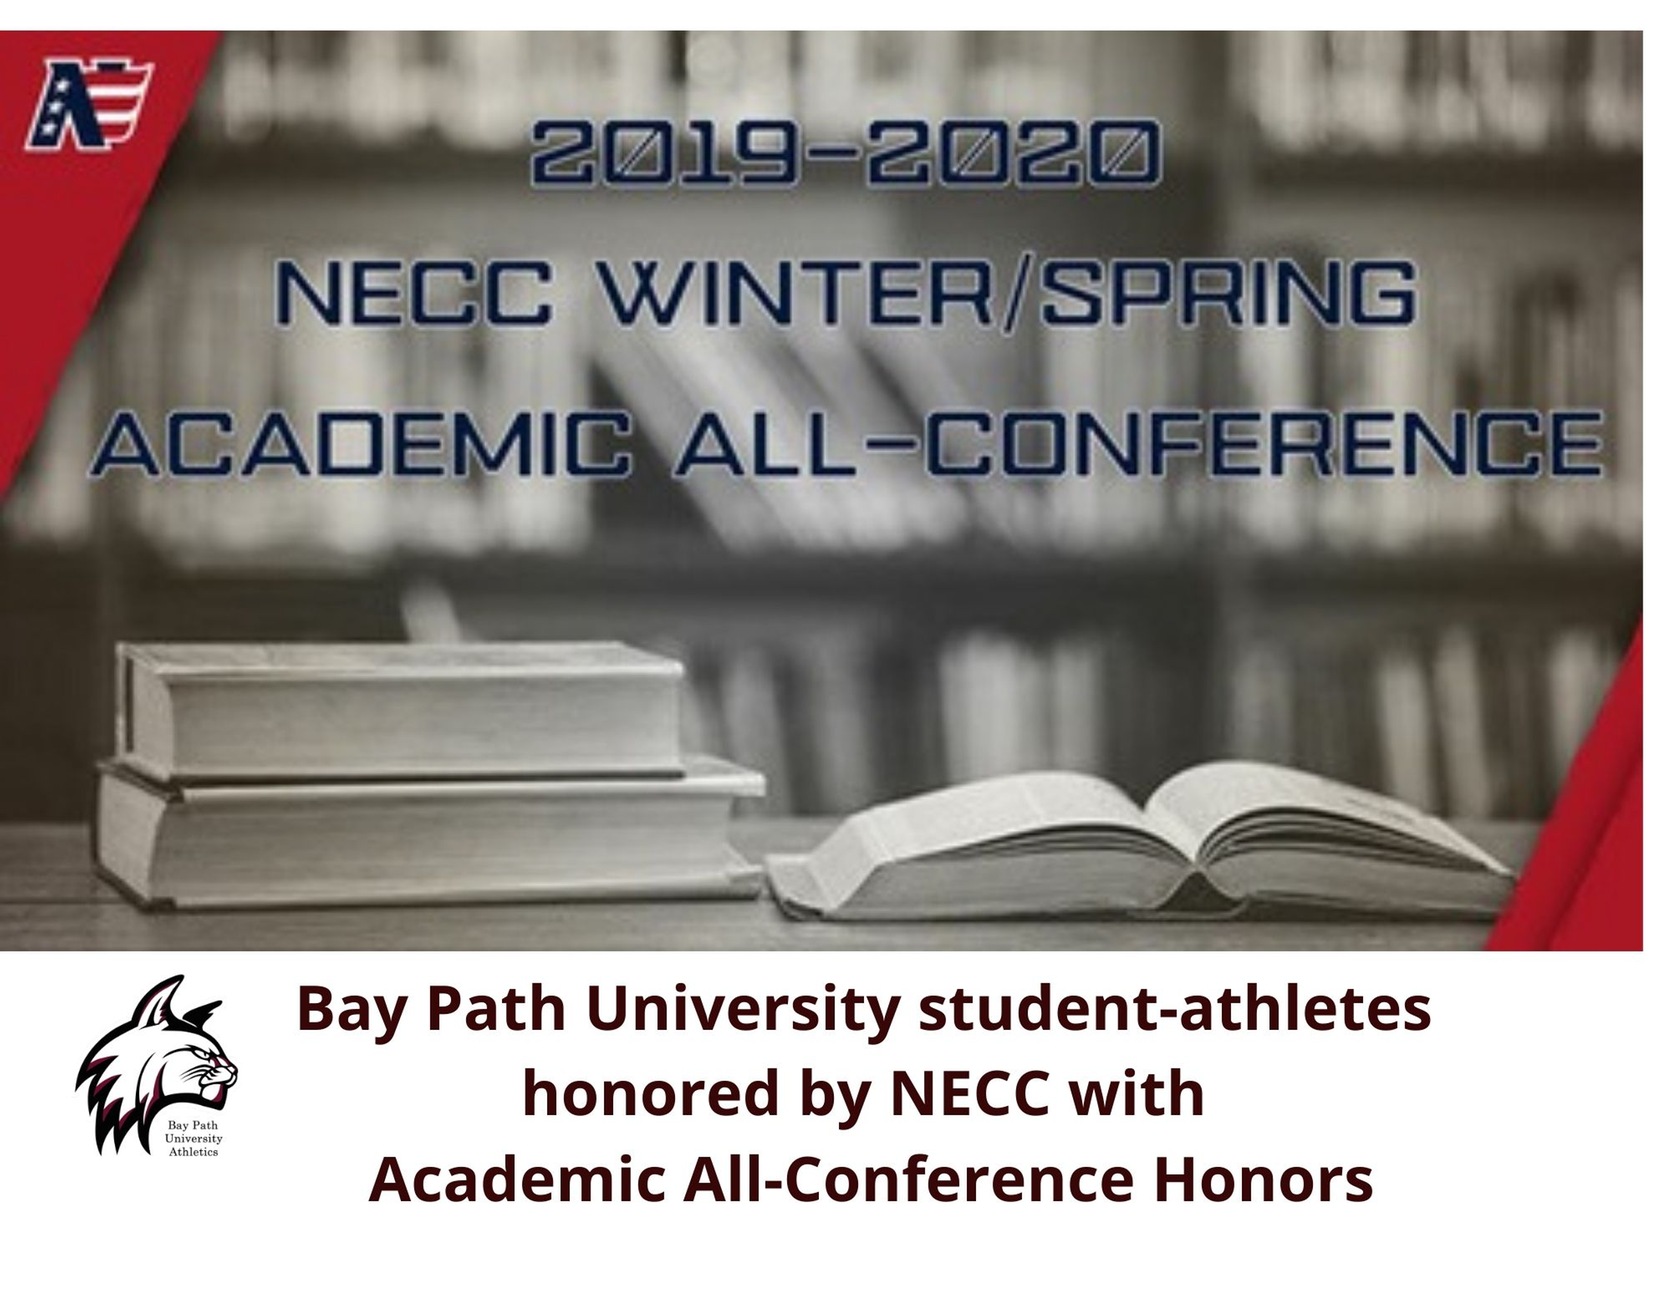 Bay Path University Places 16 Student-athletes on NECC Spring 2020 Academic All-Conference Team